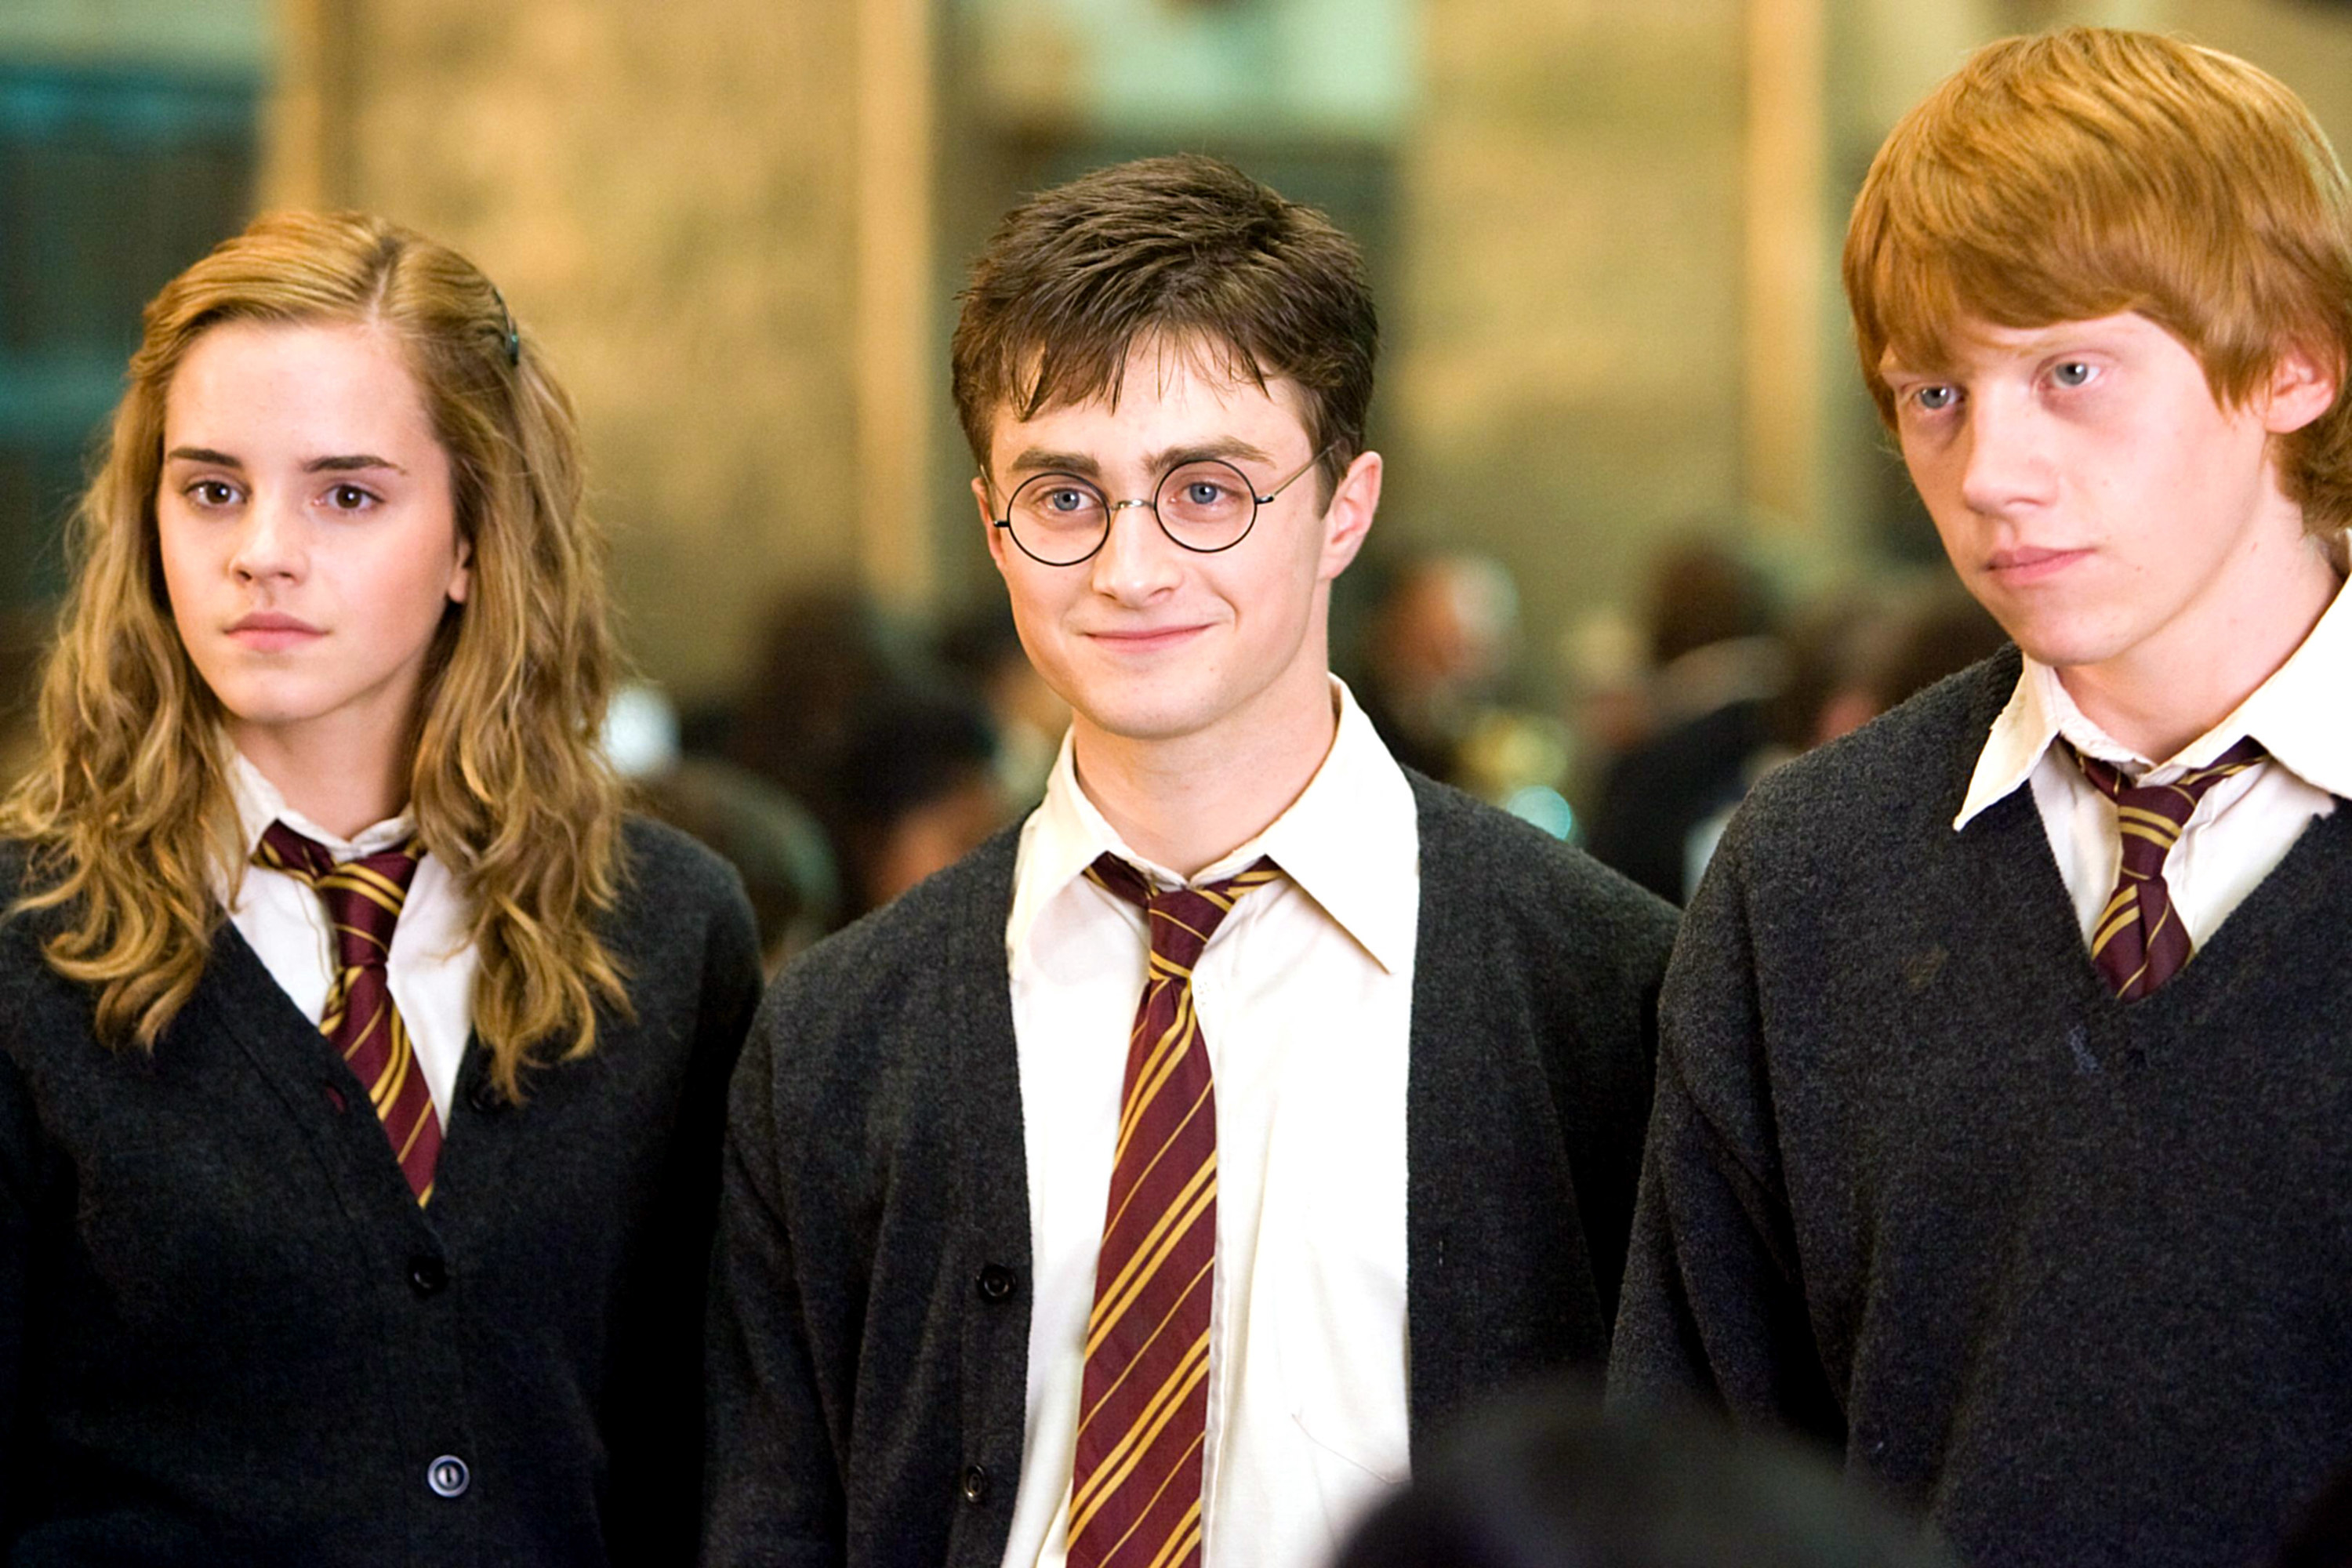 Hermione, Harry, and Ron standing together